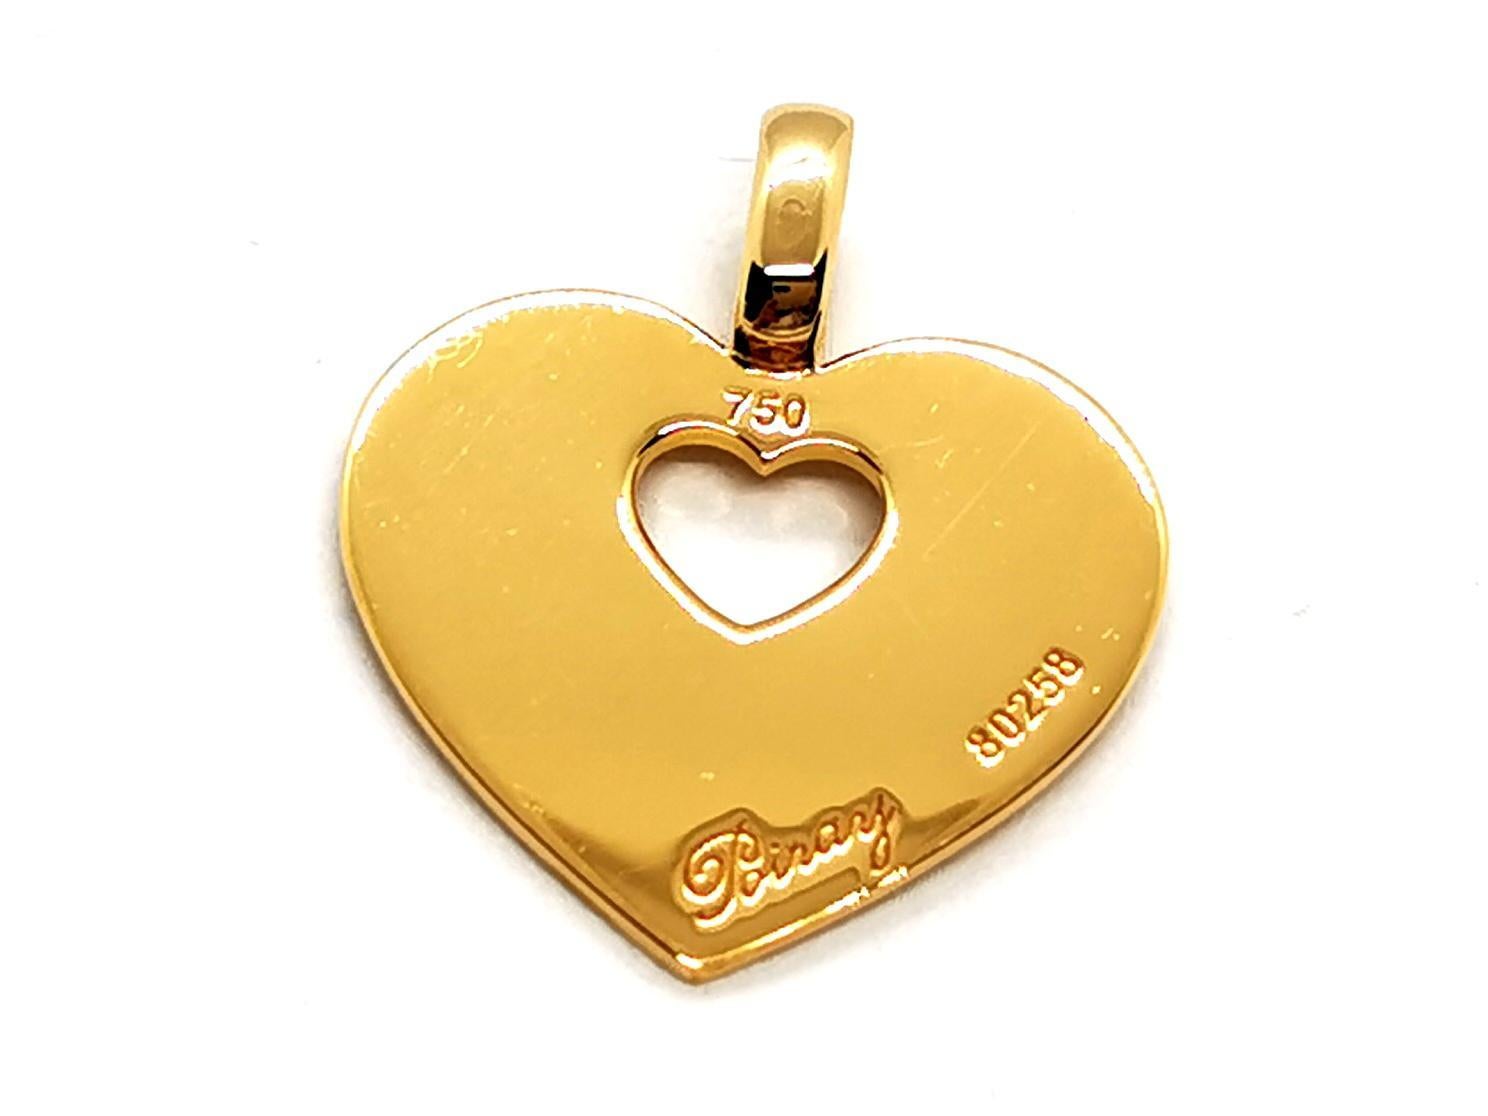 Pendant yellow gold 750 thousandth (18 carats) Poiret. model secret heart number 80258. width: 2 cm. height: 23.5. hallmark owl. total weight: 4.23 g. excellent condition
